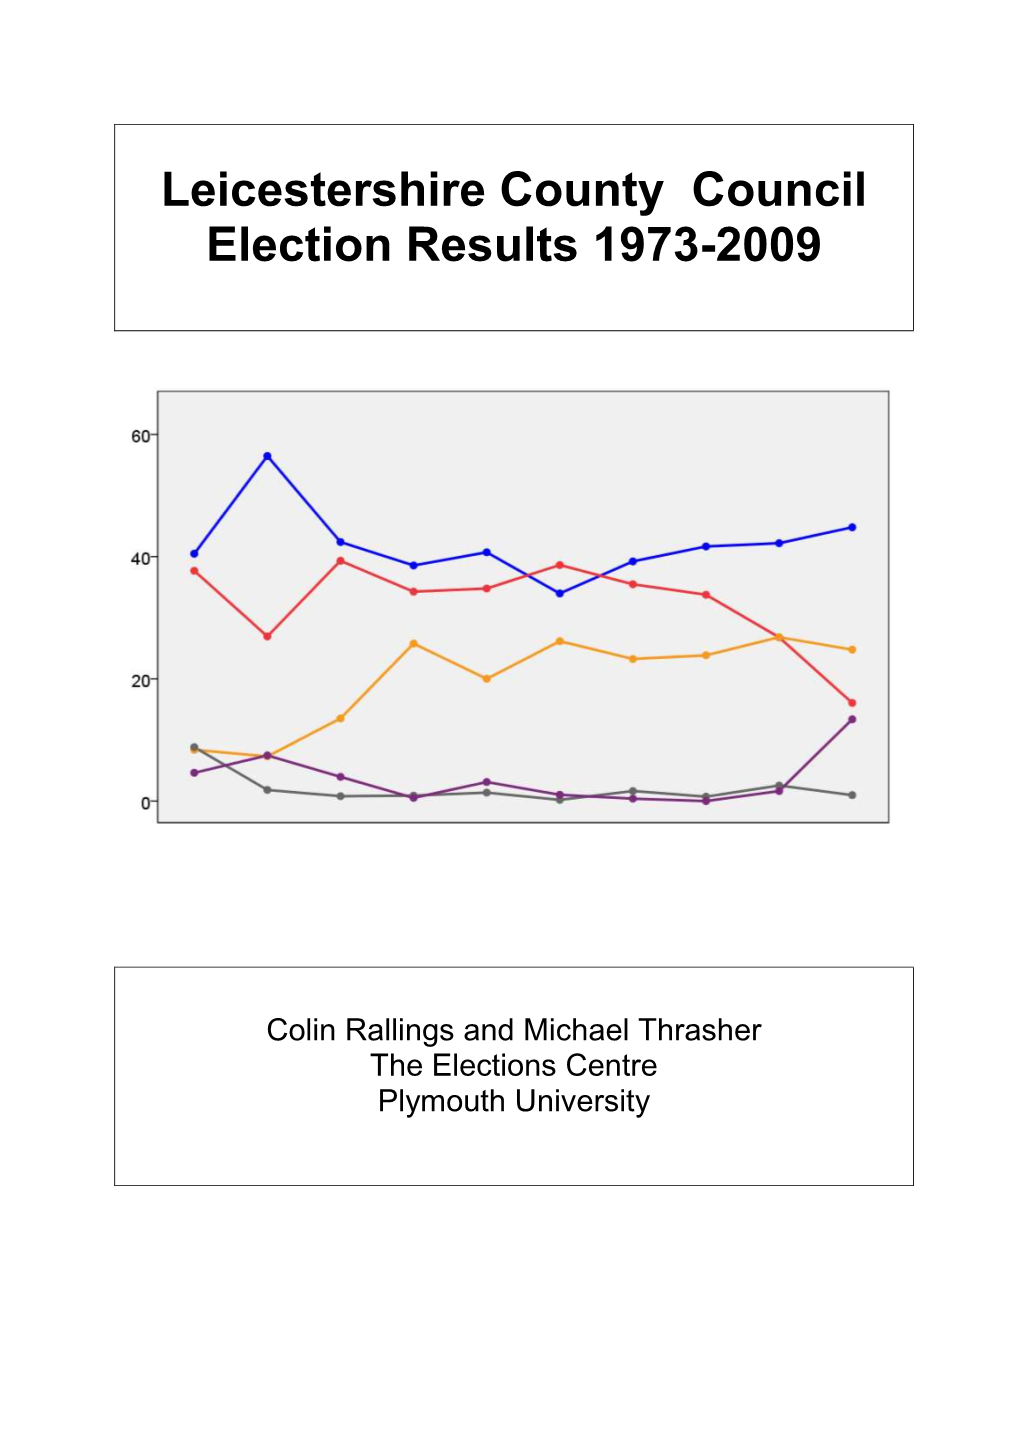 Leicestershire County Council Election Results 1973-2009